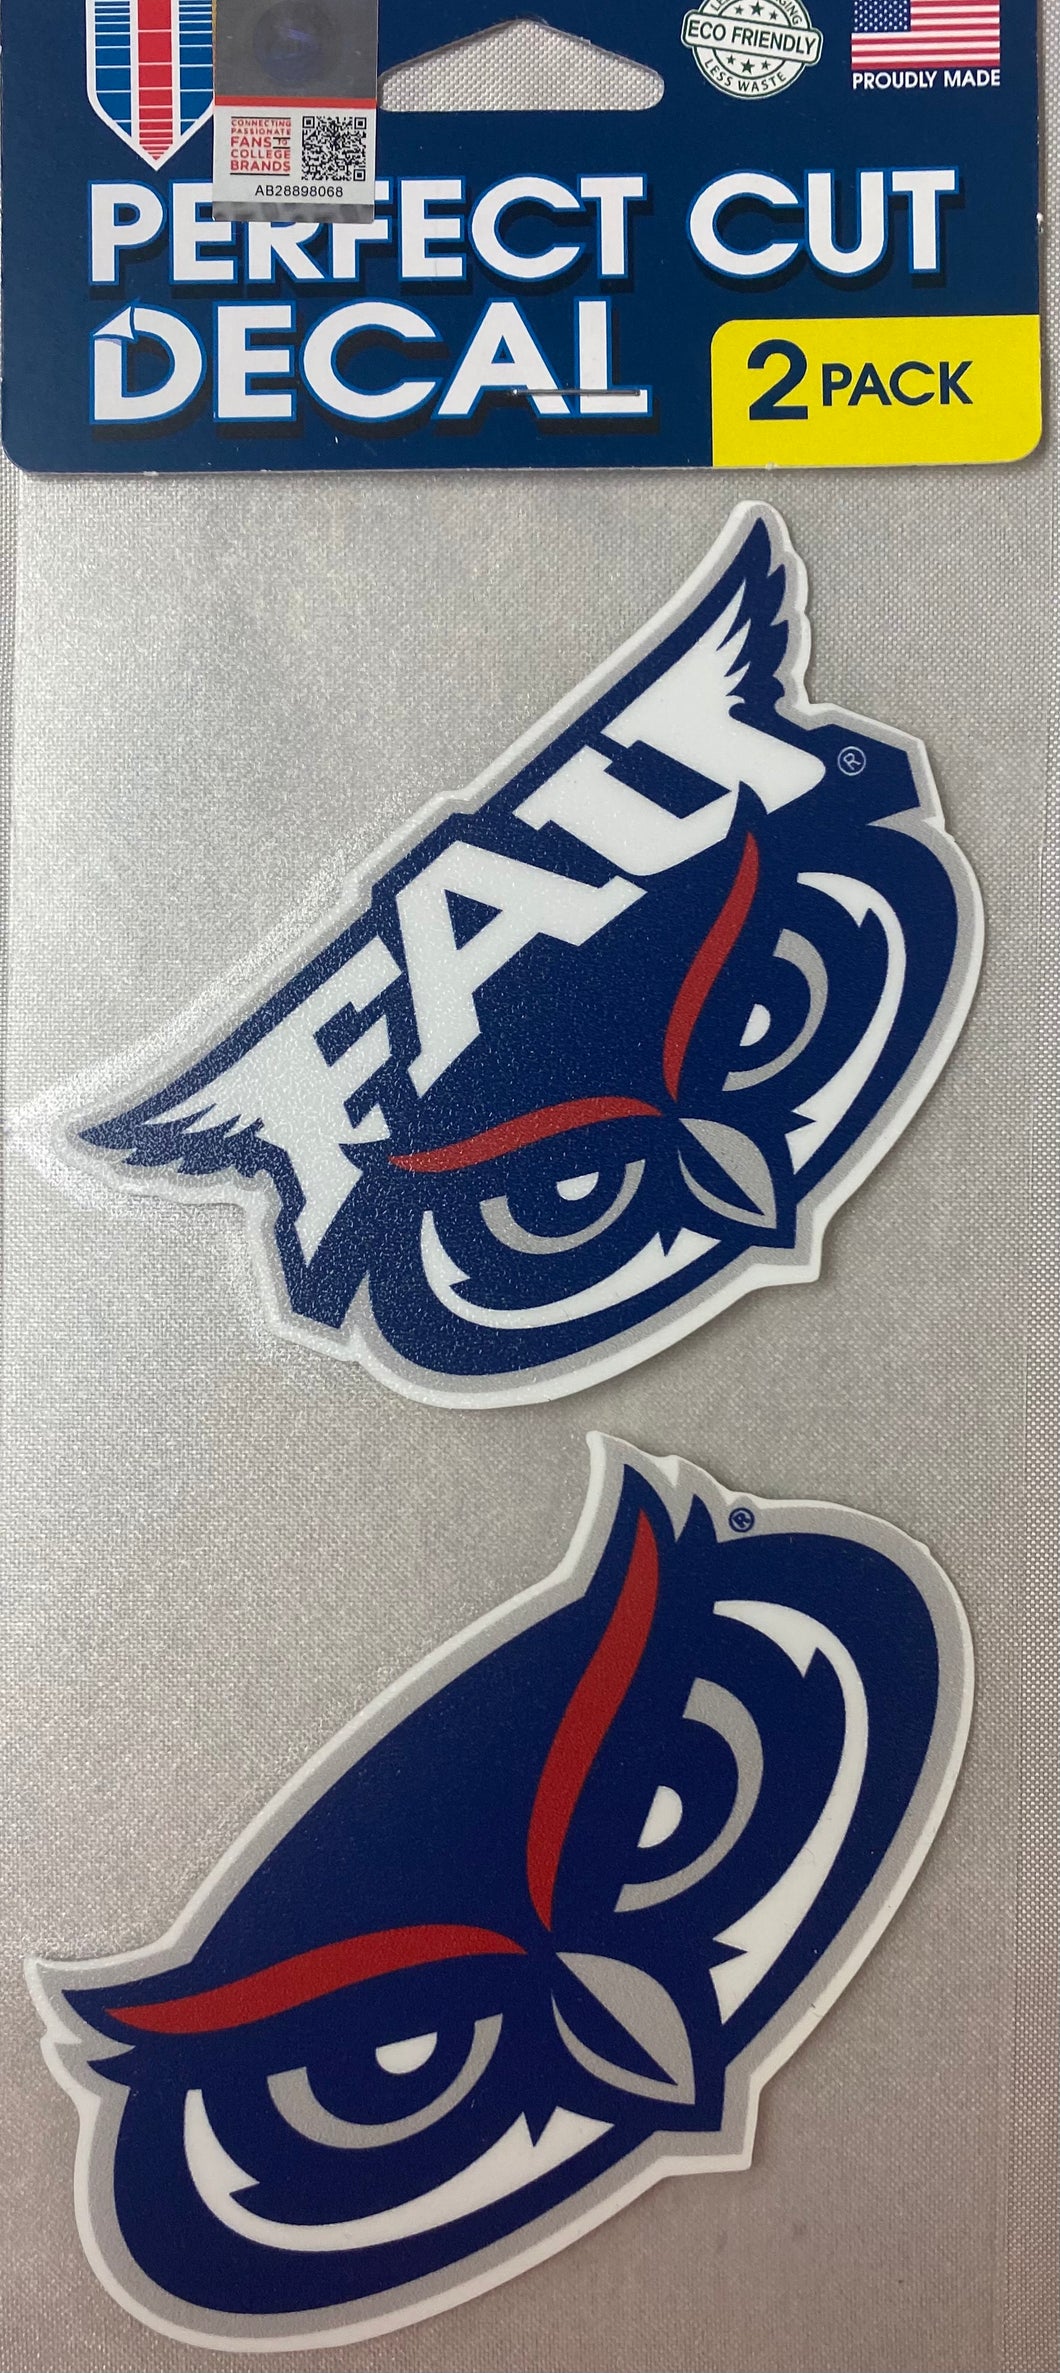 Decal Perfect Cut 2 pack. Logo 1/8